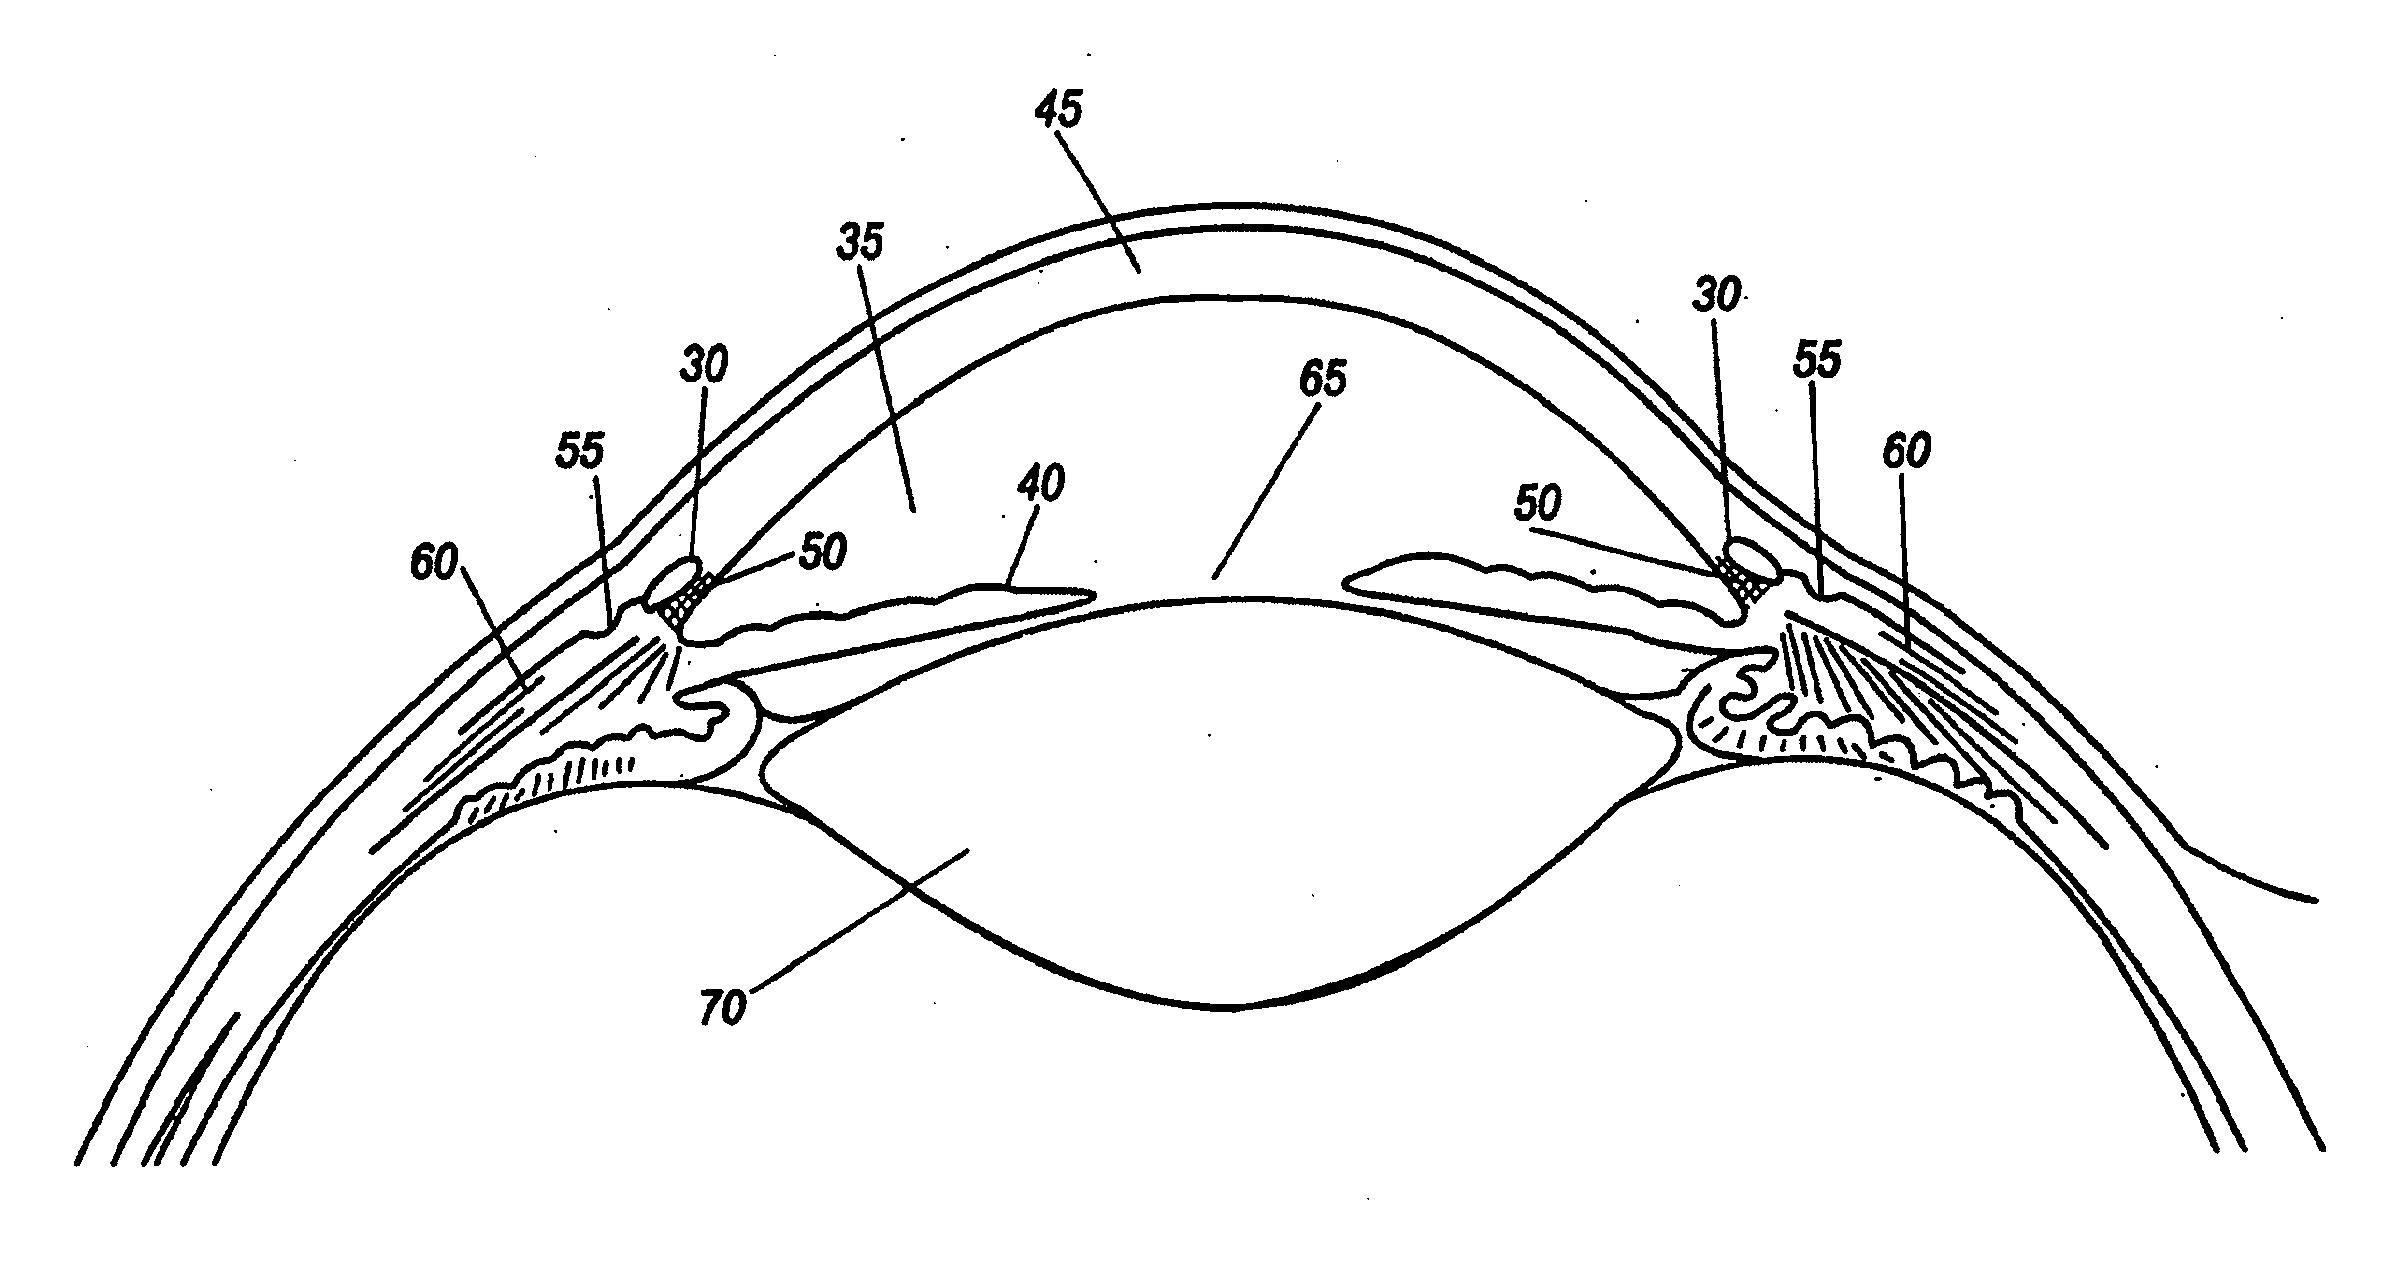 Shunt device and method for treating ocular disorders